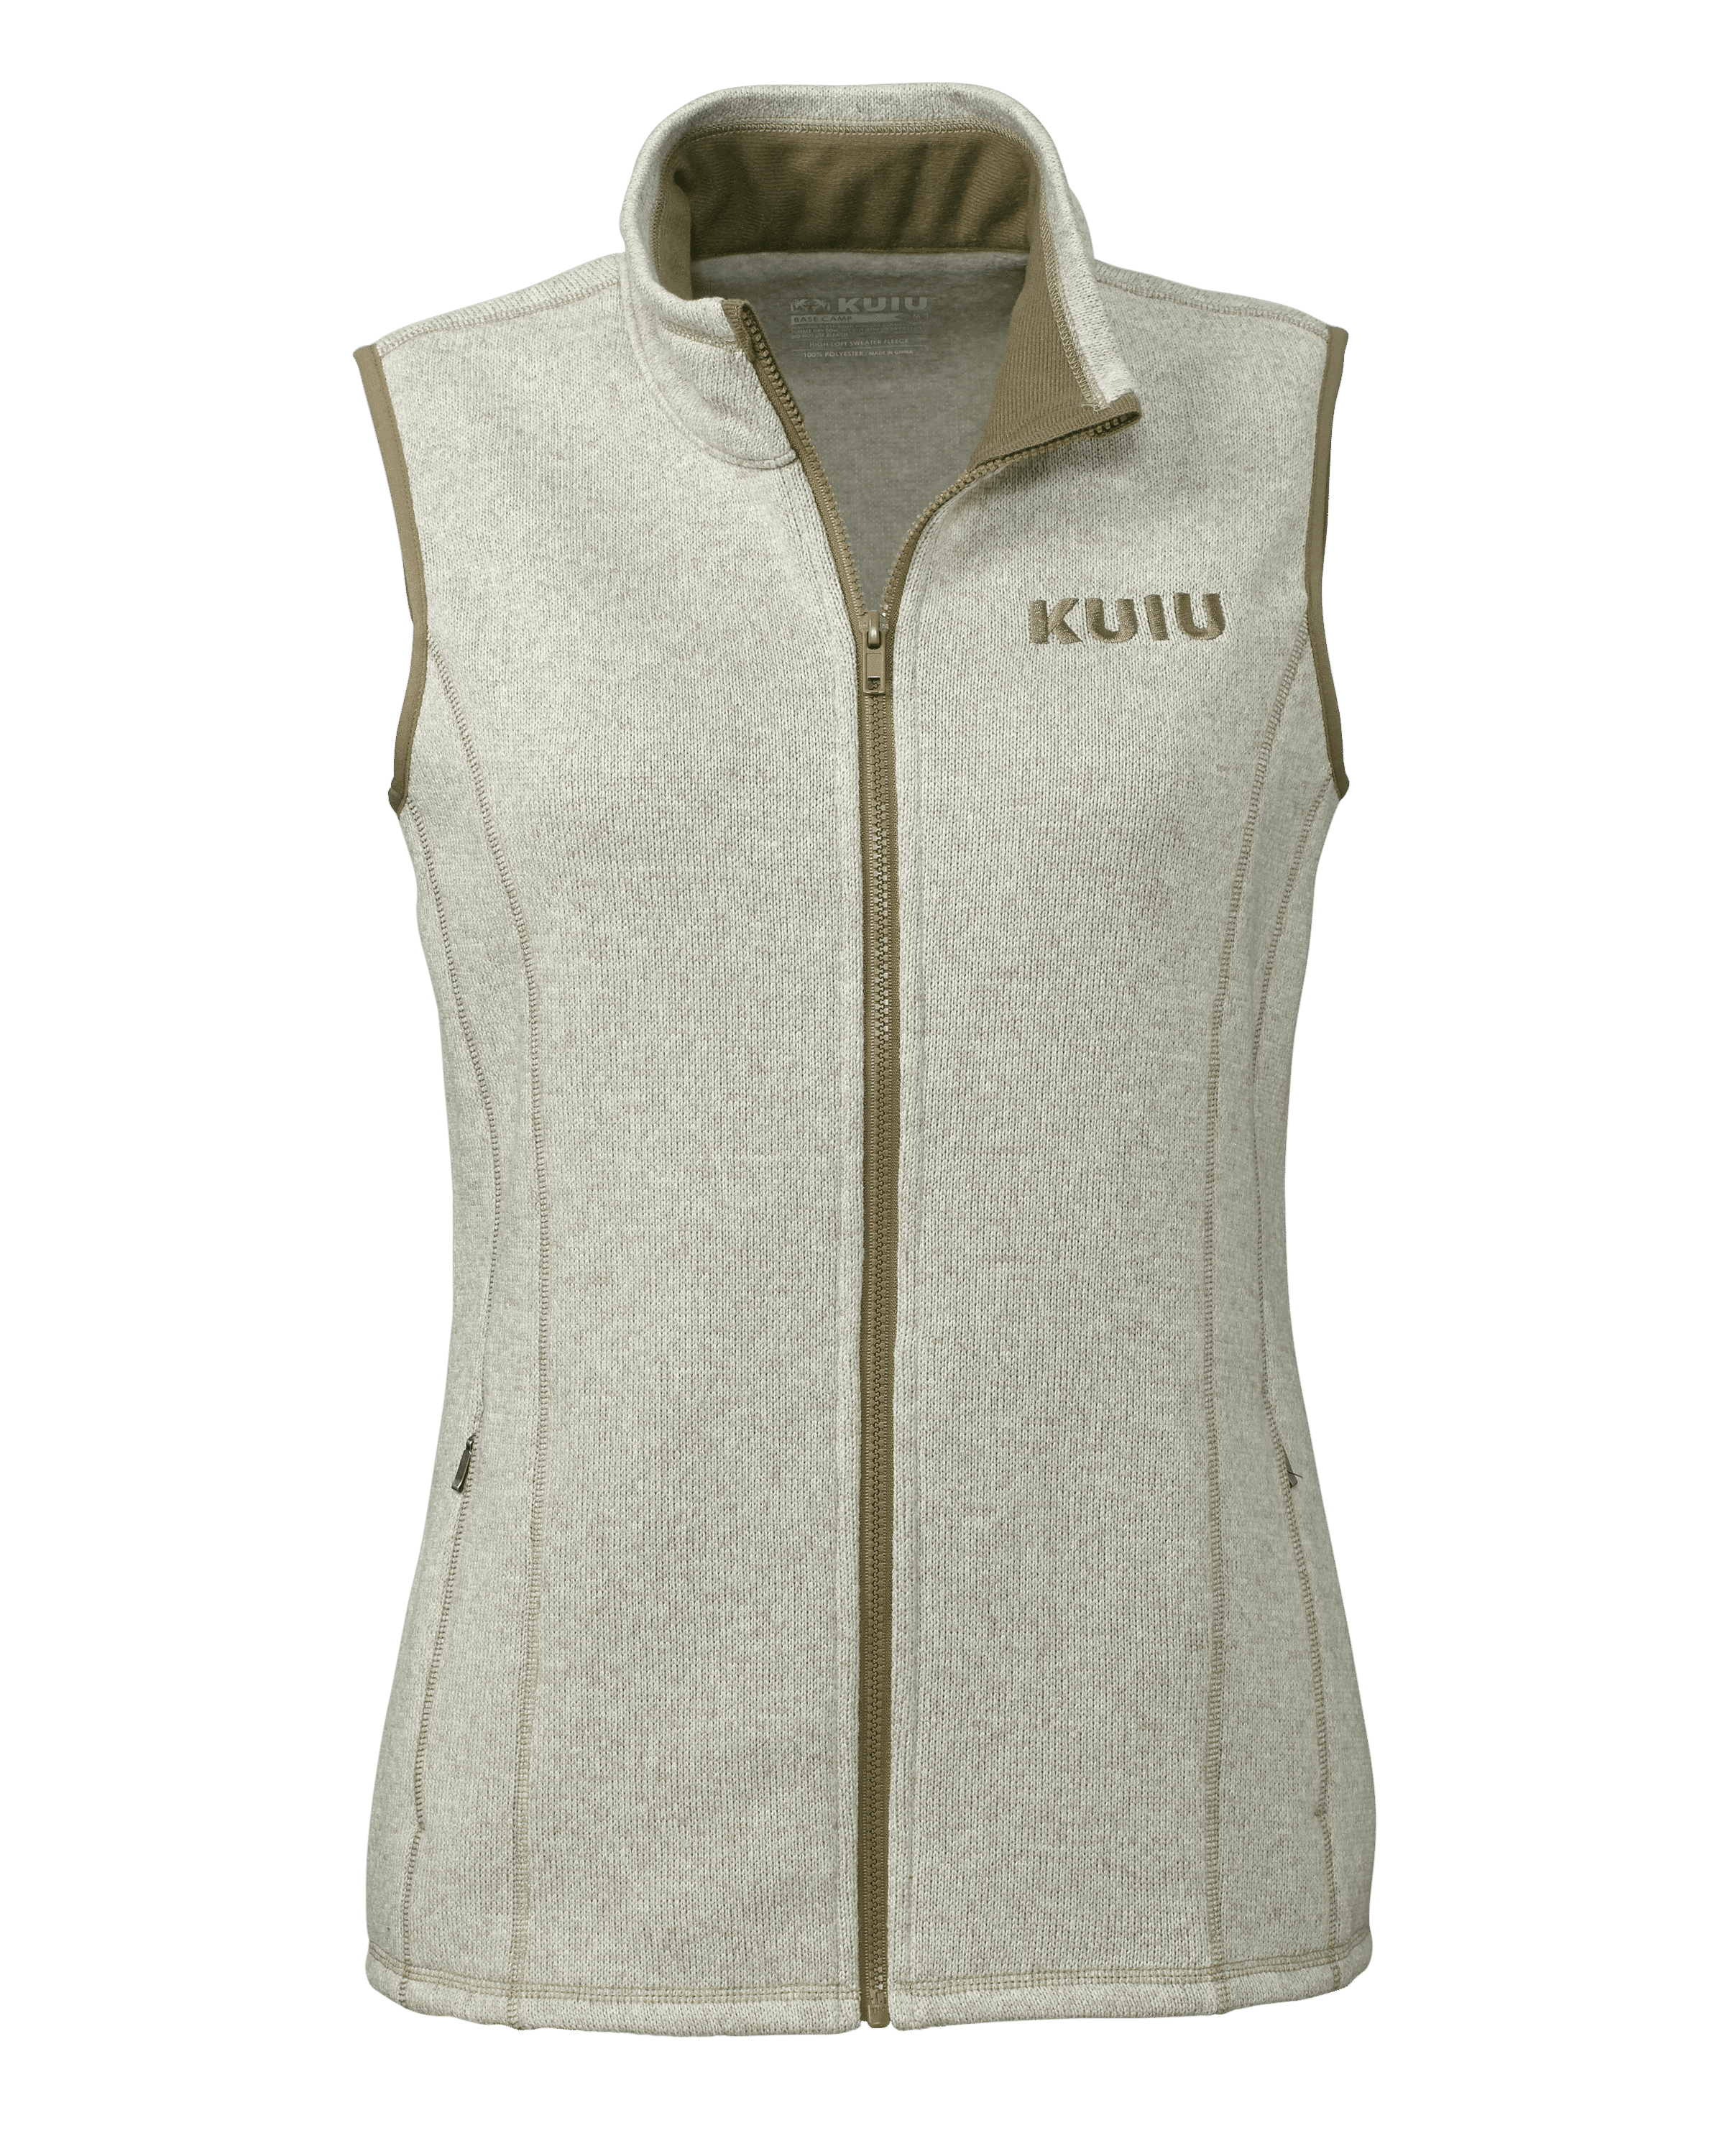 KUIU Outlet Women's Base Camp Sweater Vest in Oatmeal | Size XS